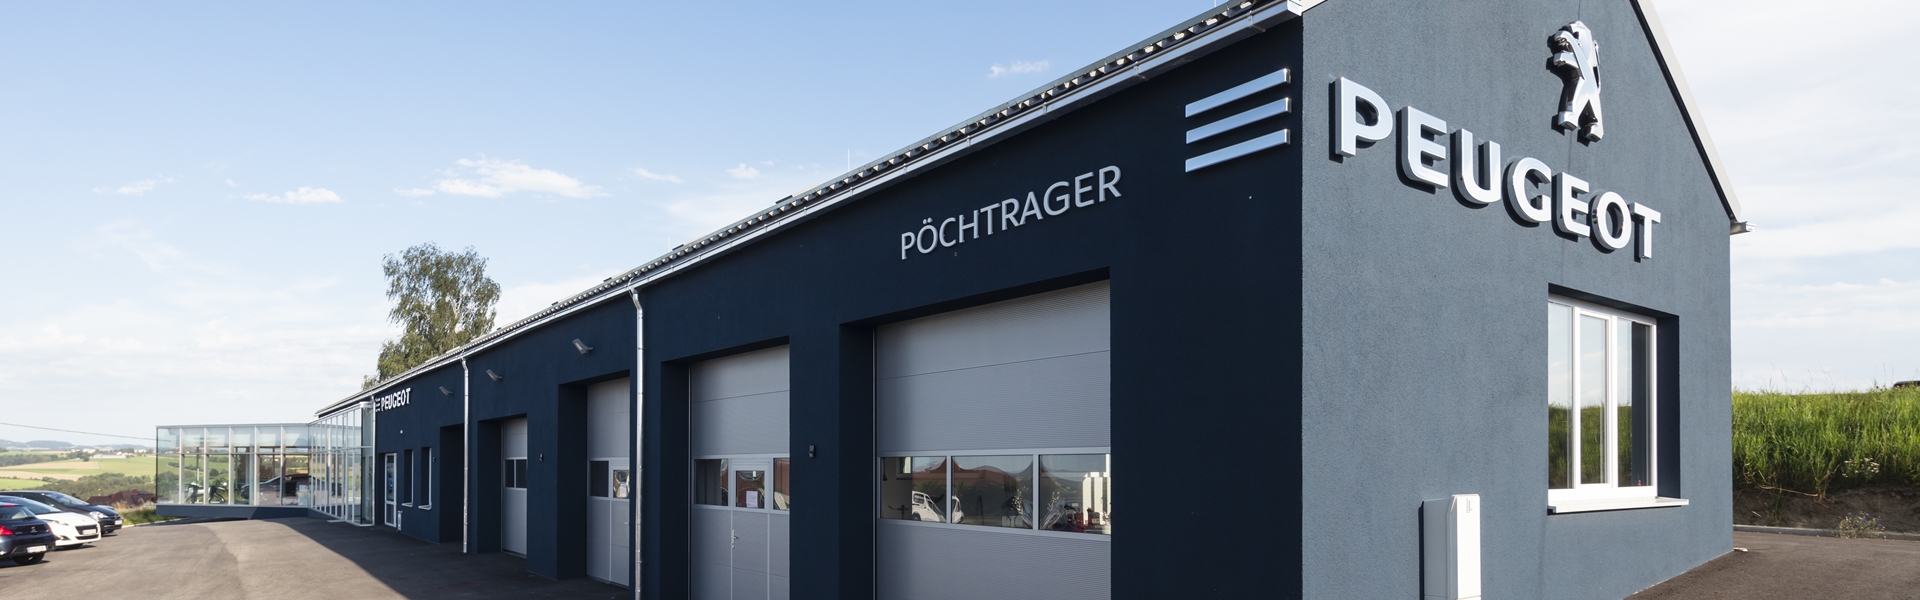 Auto Pöchtrager GmbH